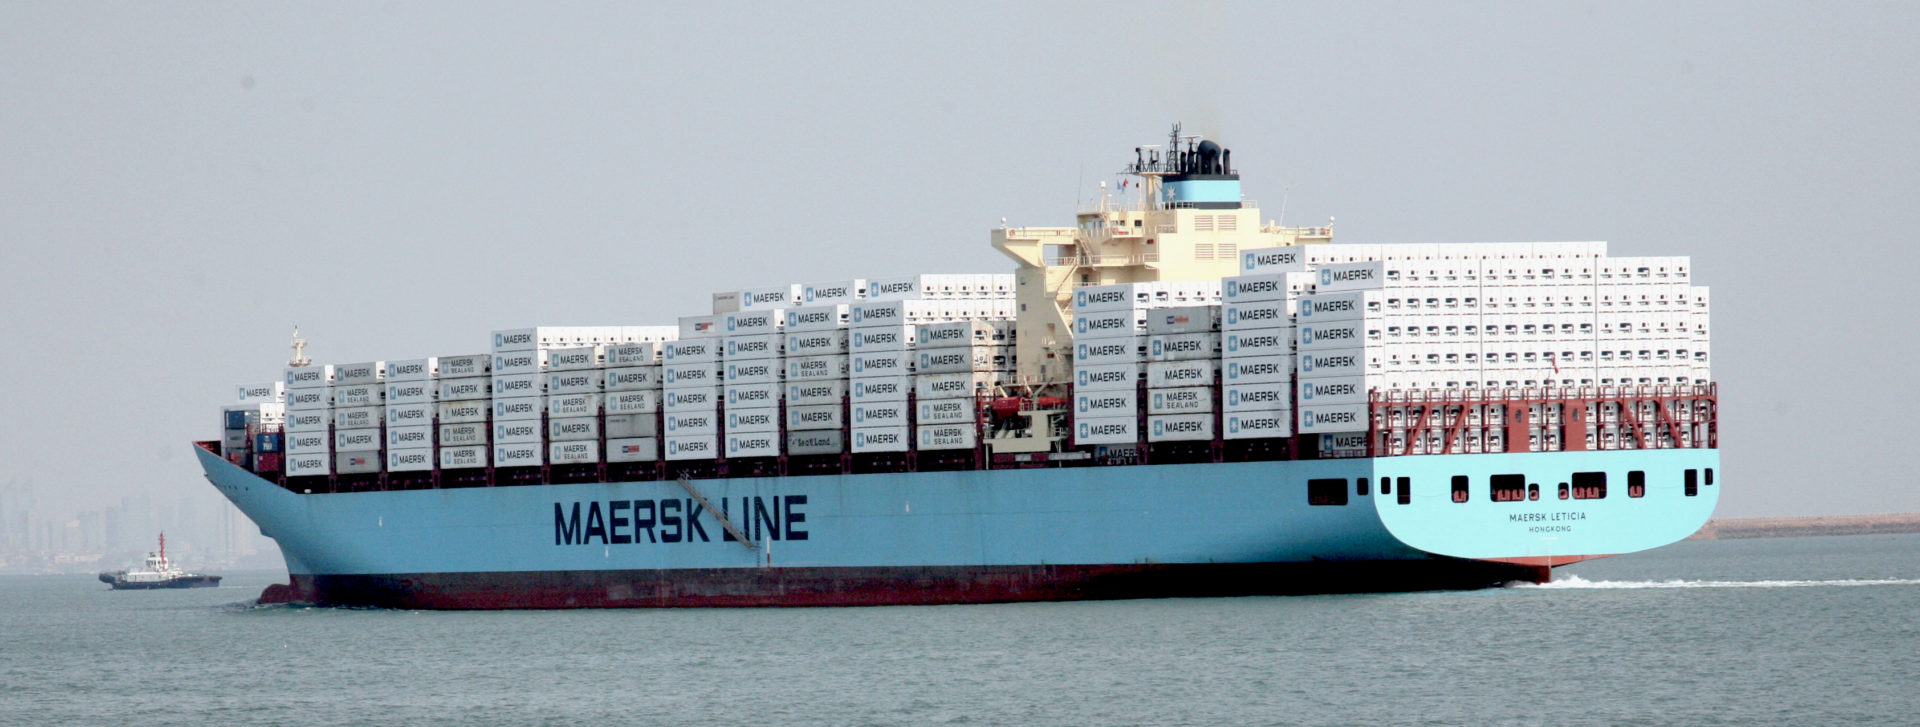 Divide & Conquer: Maersk Splits to Go After Competition